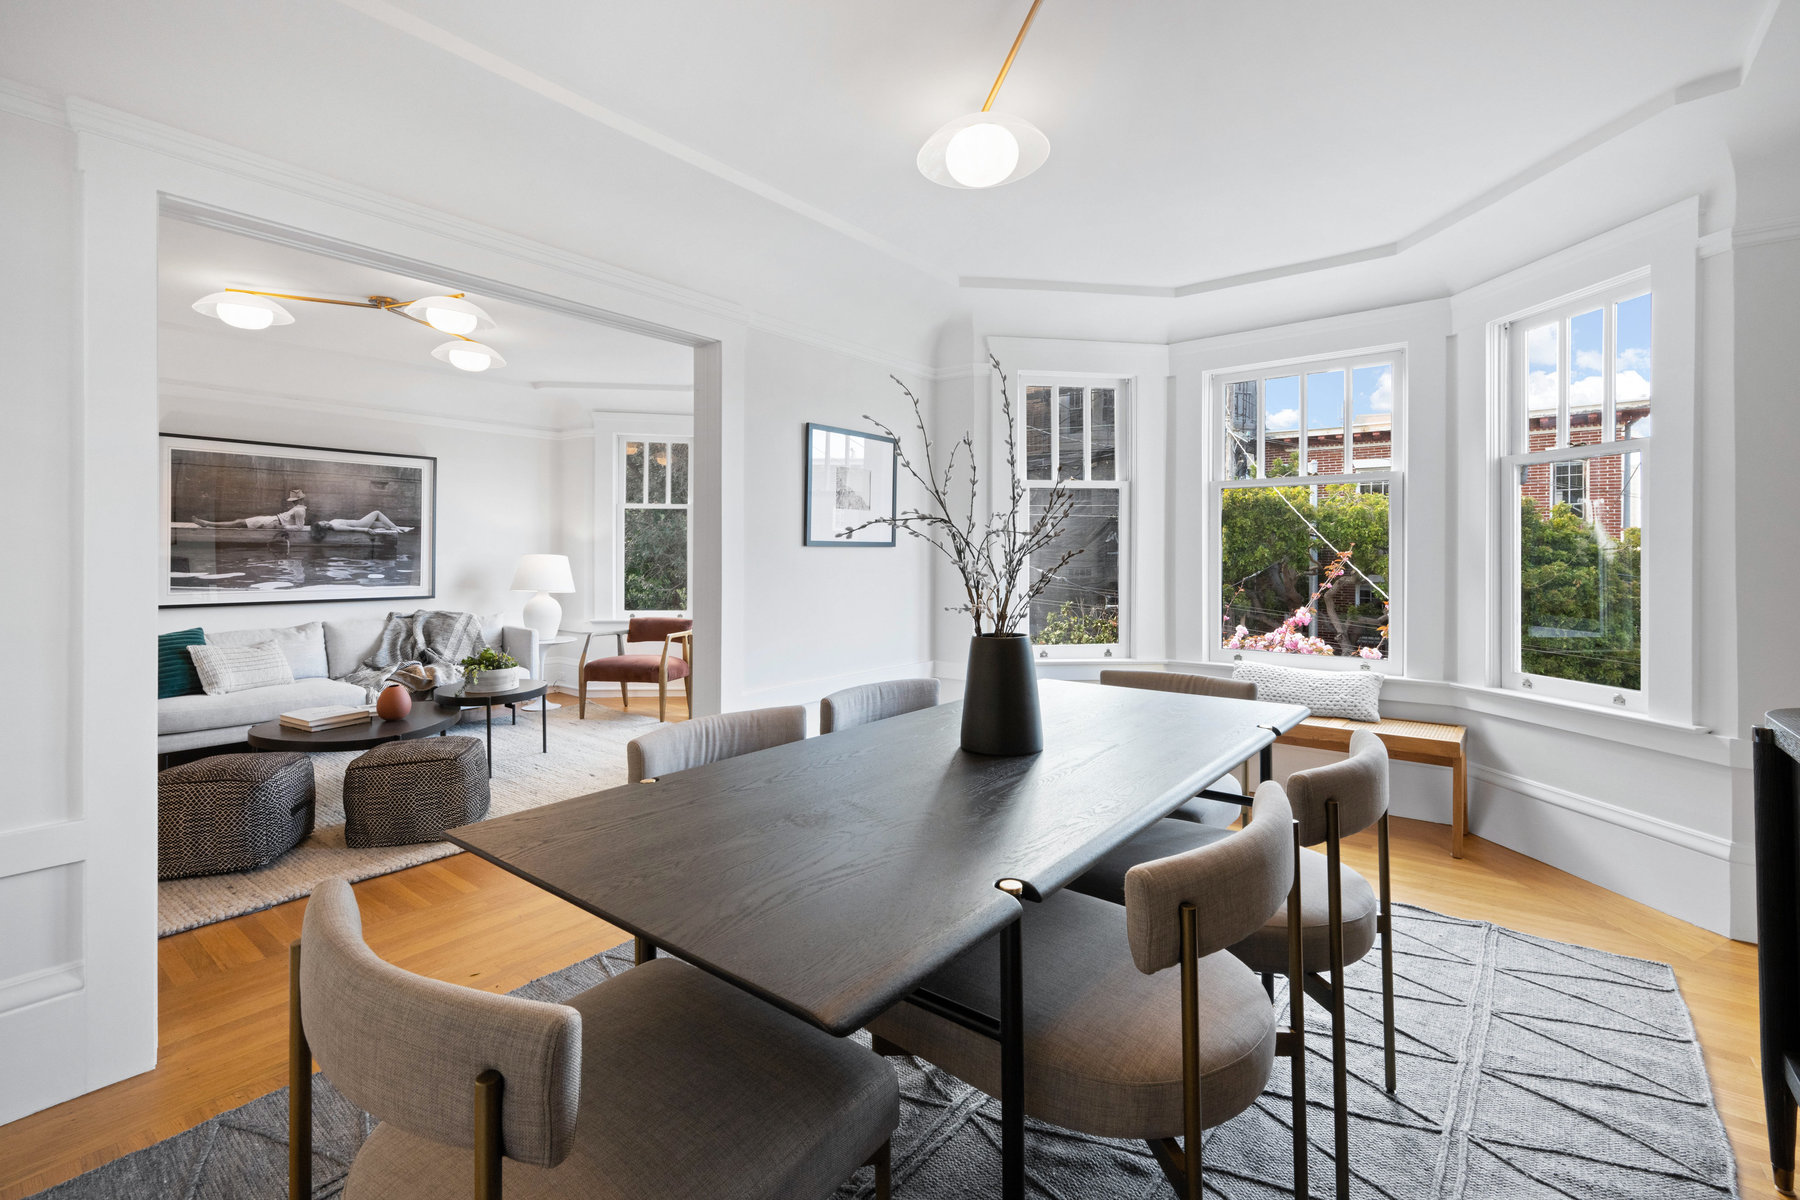 View of the public rooms at 117 Parnassus Ave in Cole Valley San Francisco